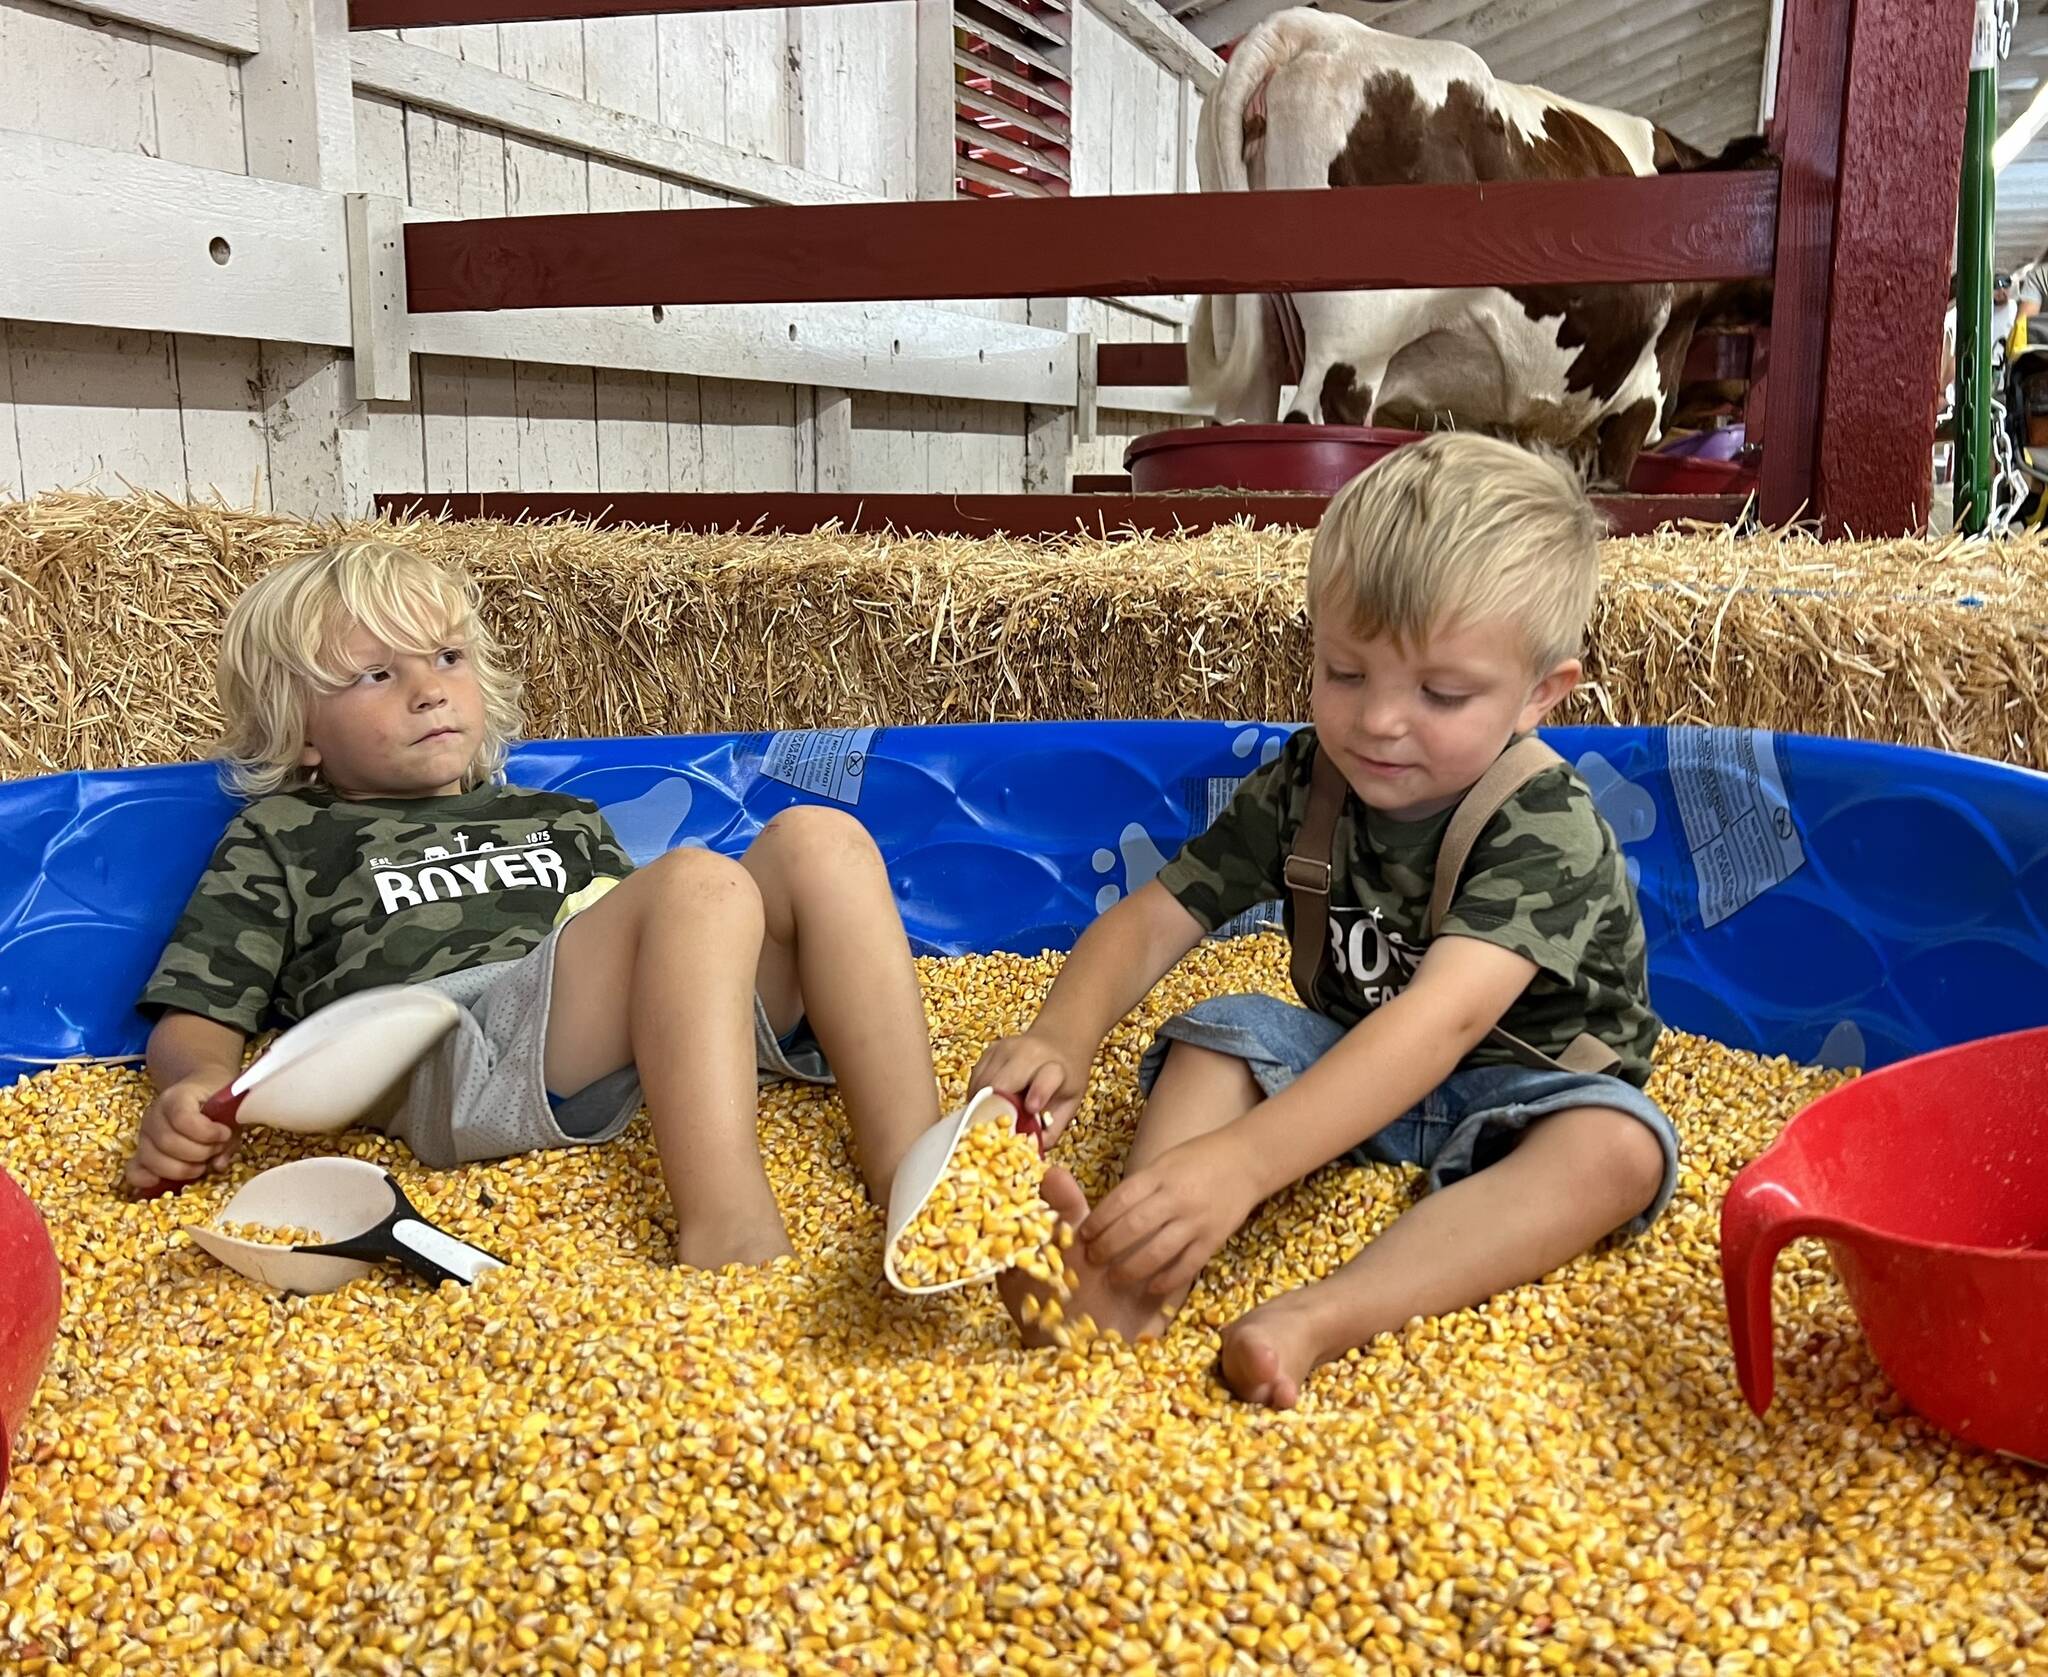 Clayton Franke / The Daily World
Brothers Ricky and Levi Boyer play in a kitty pool of corn kernels at the Grays Harbor County Fair on Aug. 2.